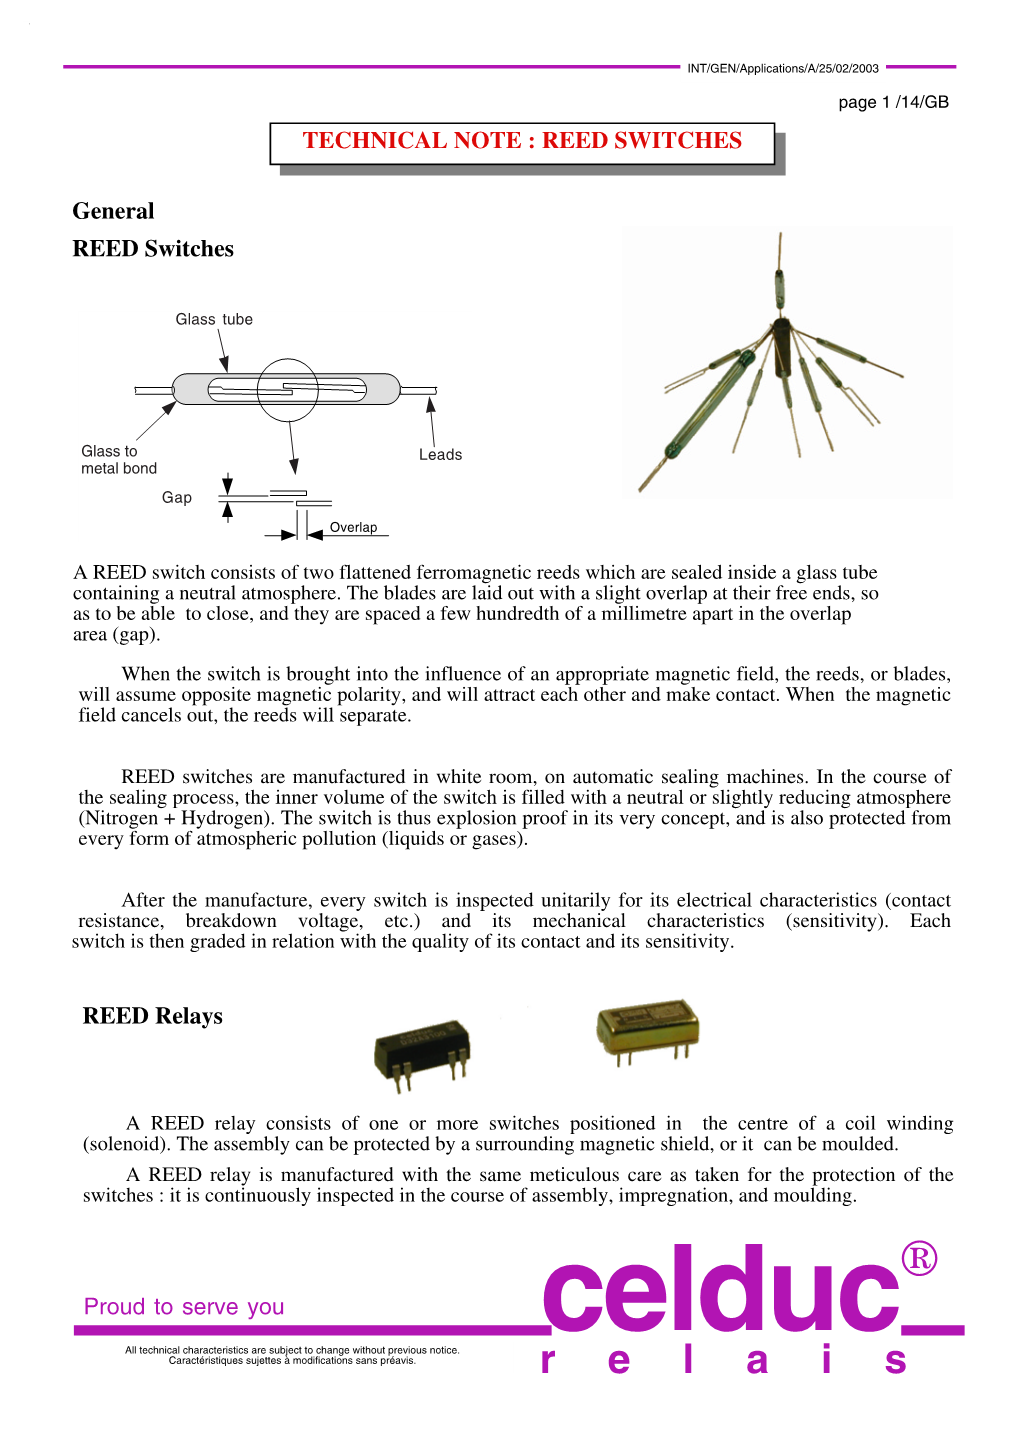 Principle of REED Relays & Switches